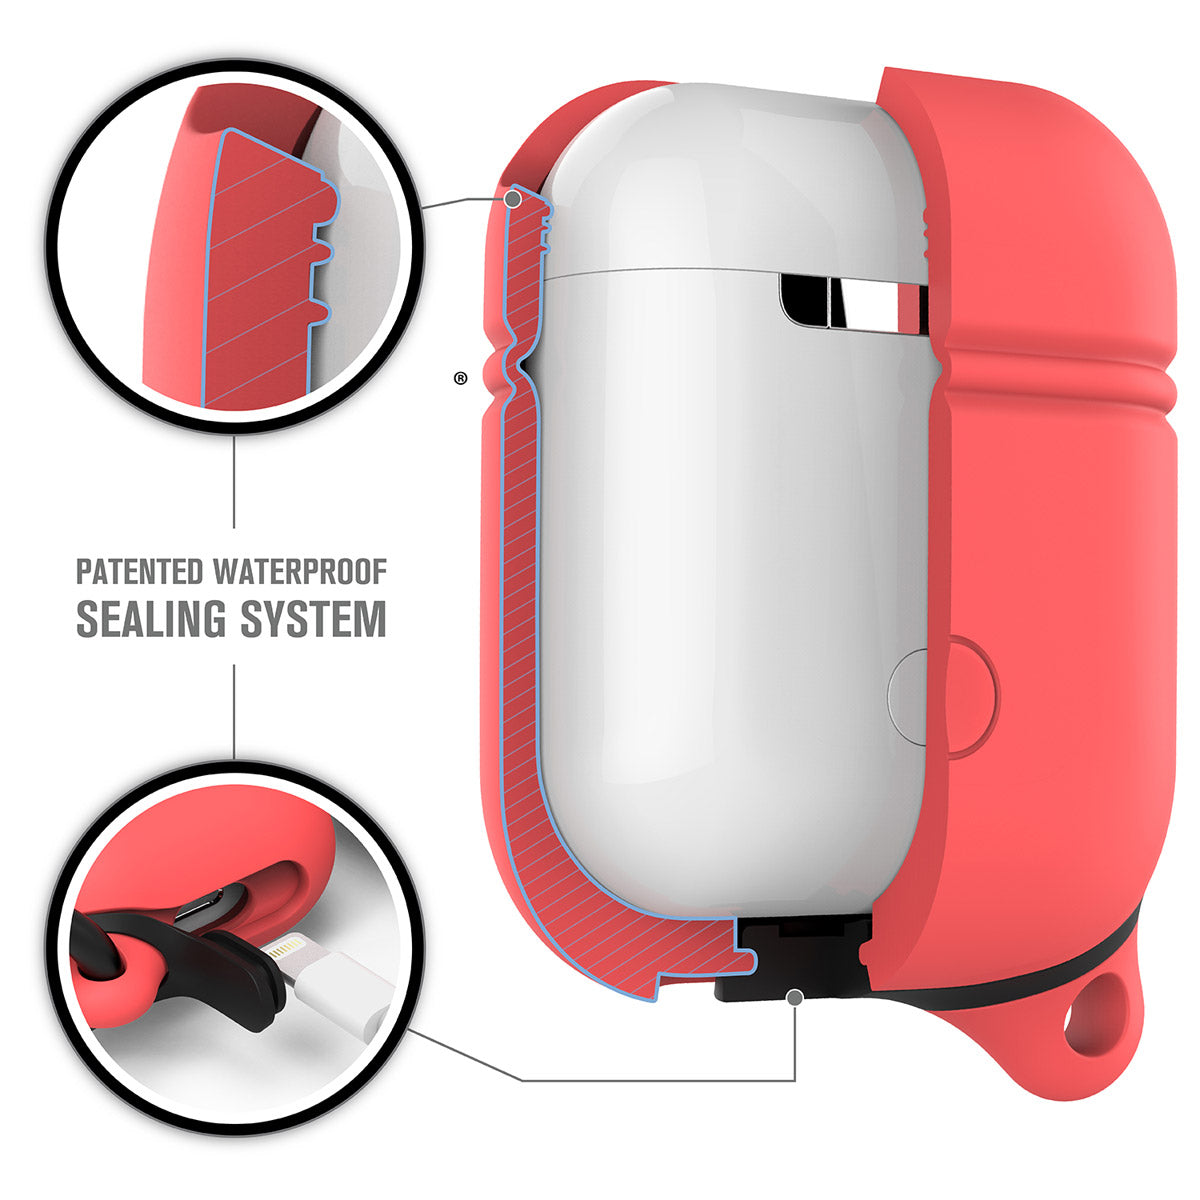 Catalyst airpods gen2/1 waterproof case + carabiner showing the inner materials of the case in coral text reads patented waterproof sealing system